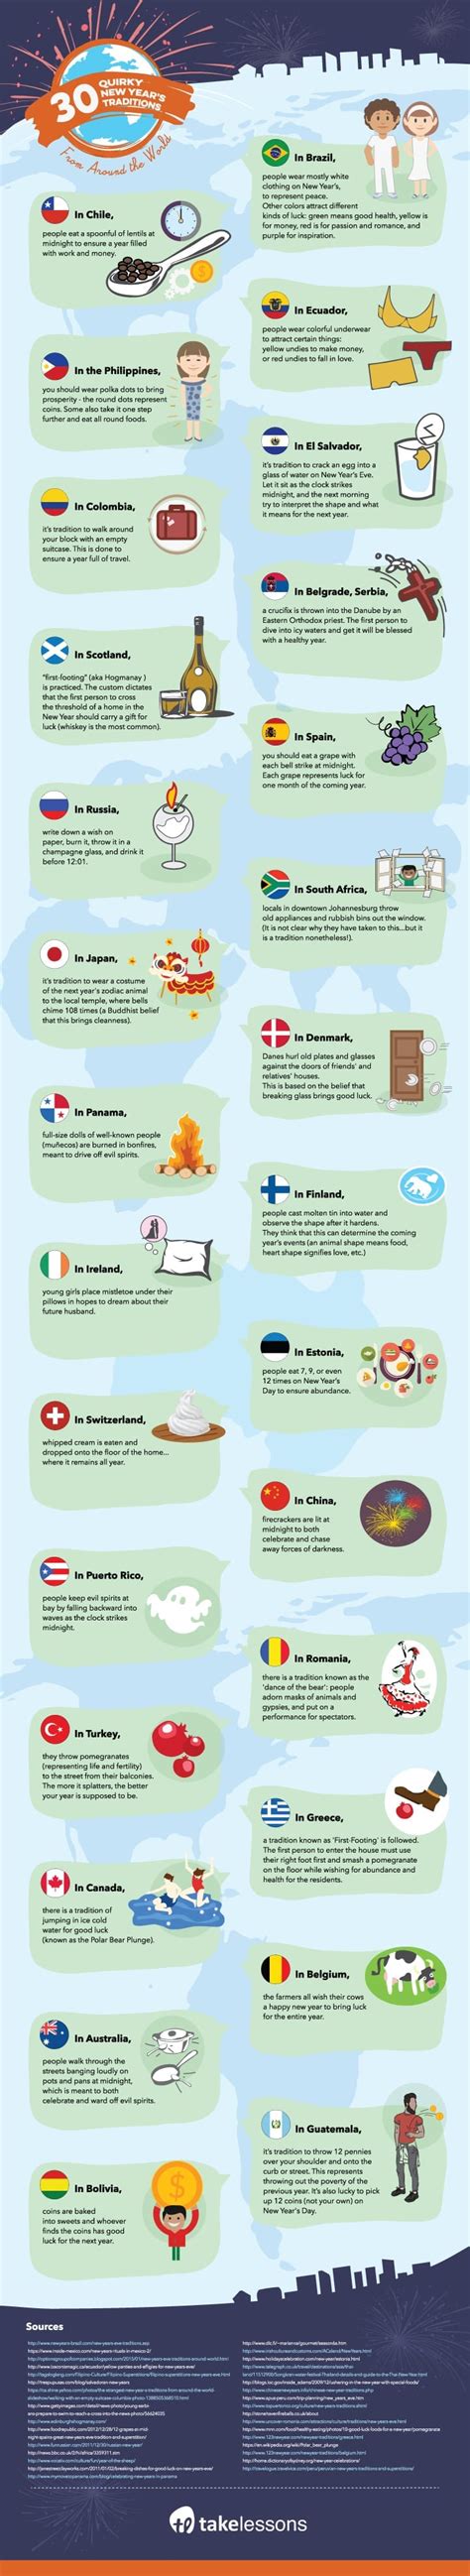 30 Quirky New Years Traditions From Around The World Infographic